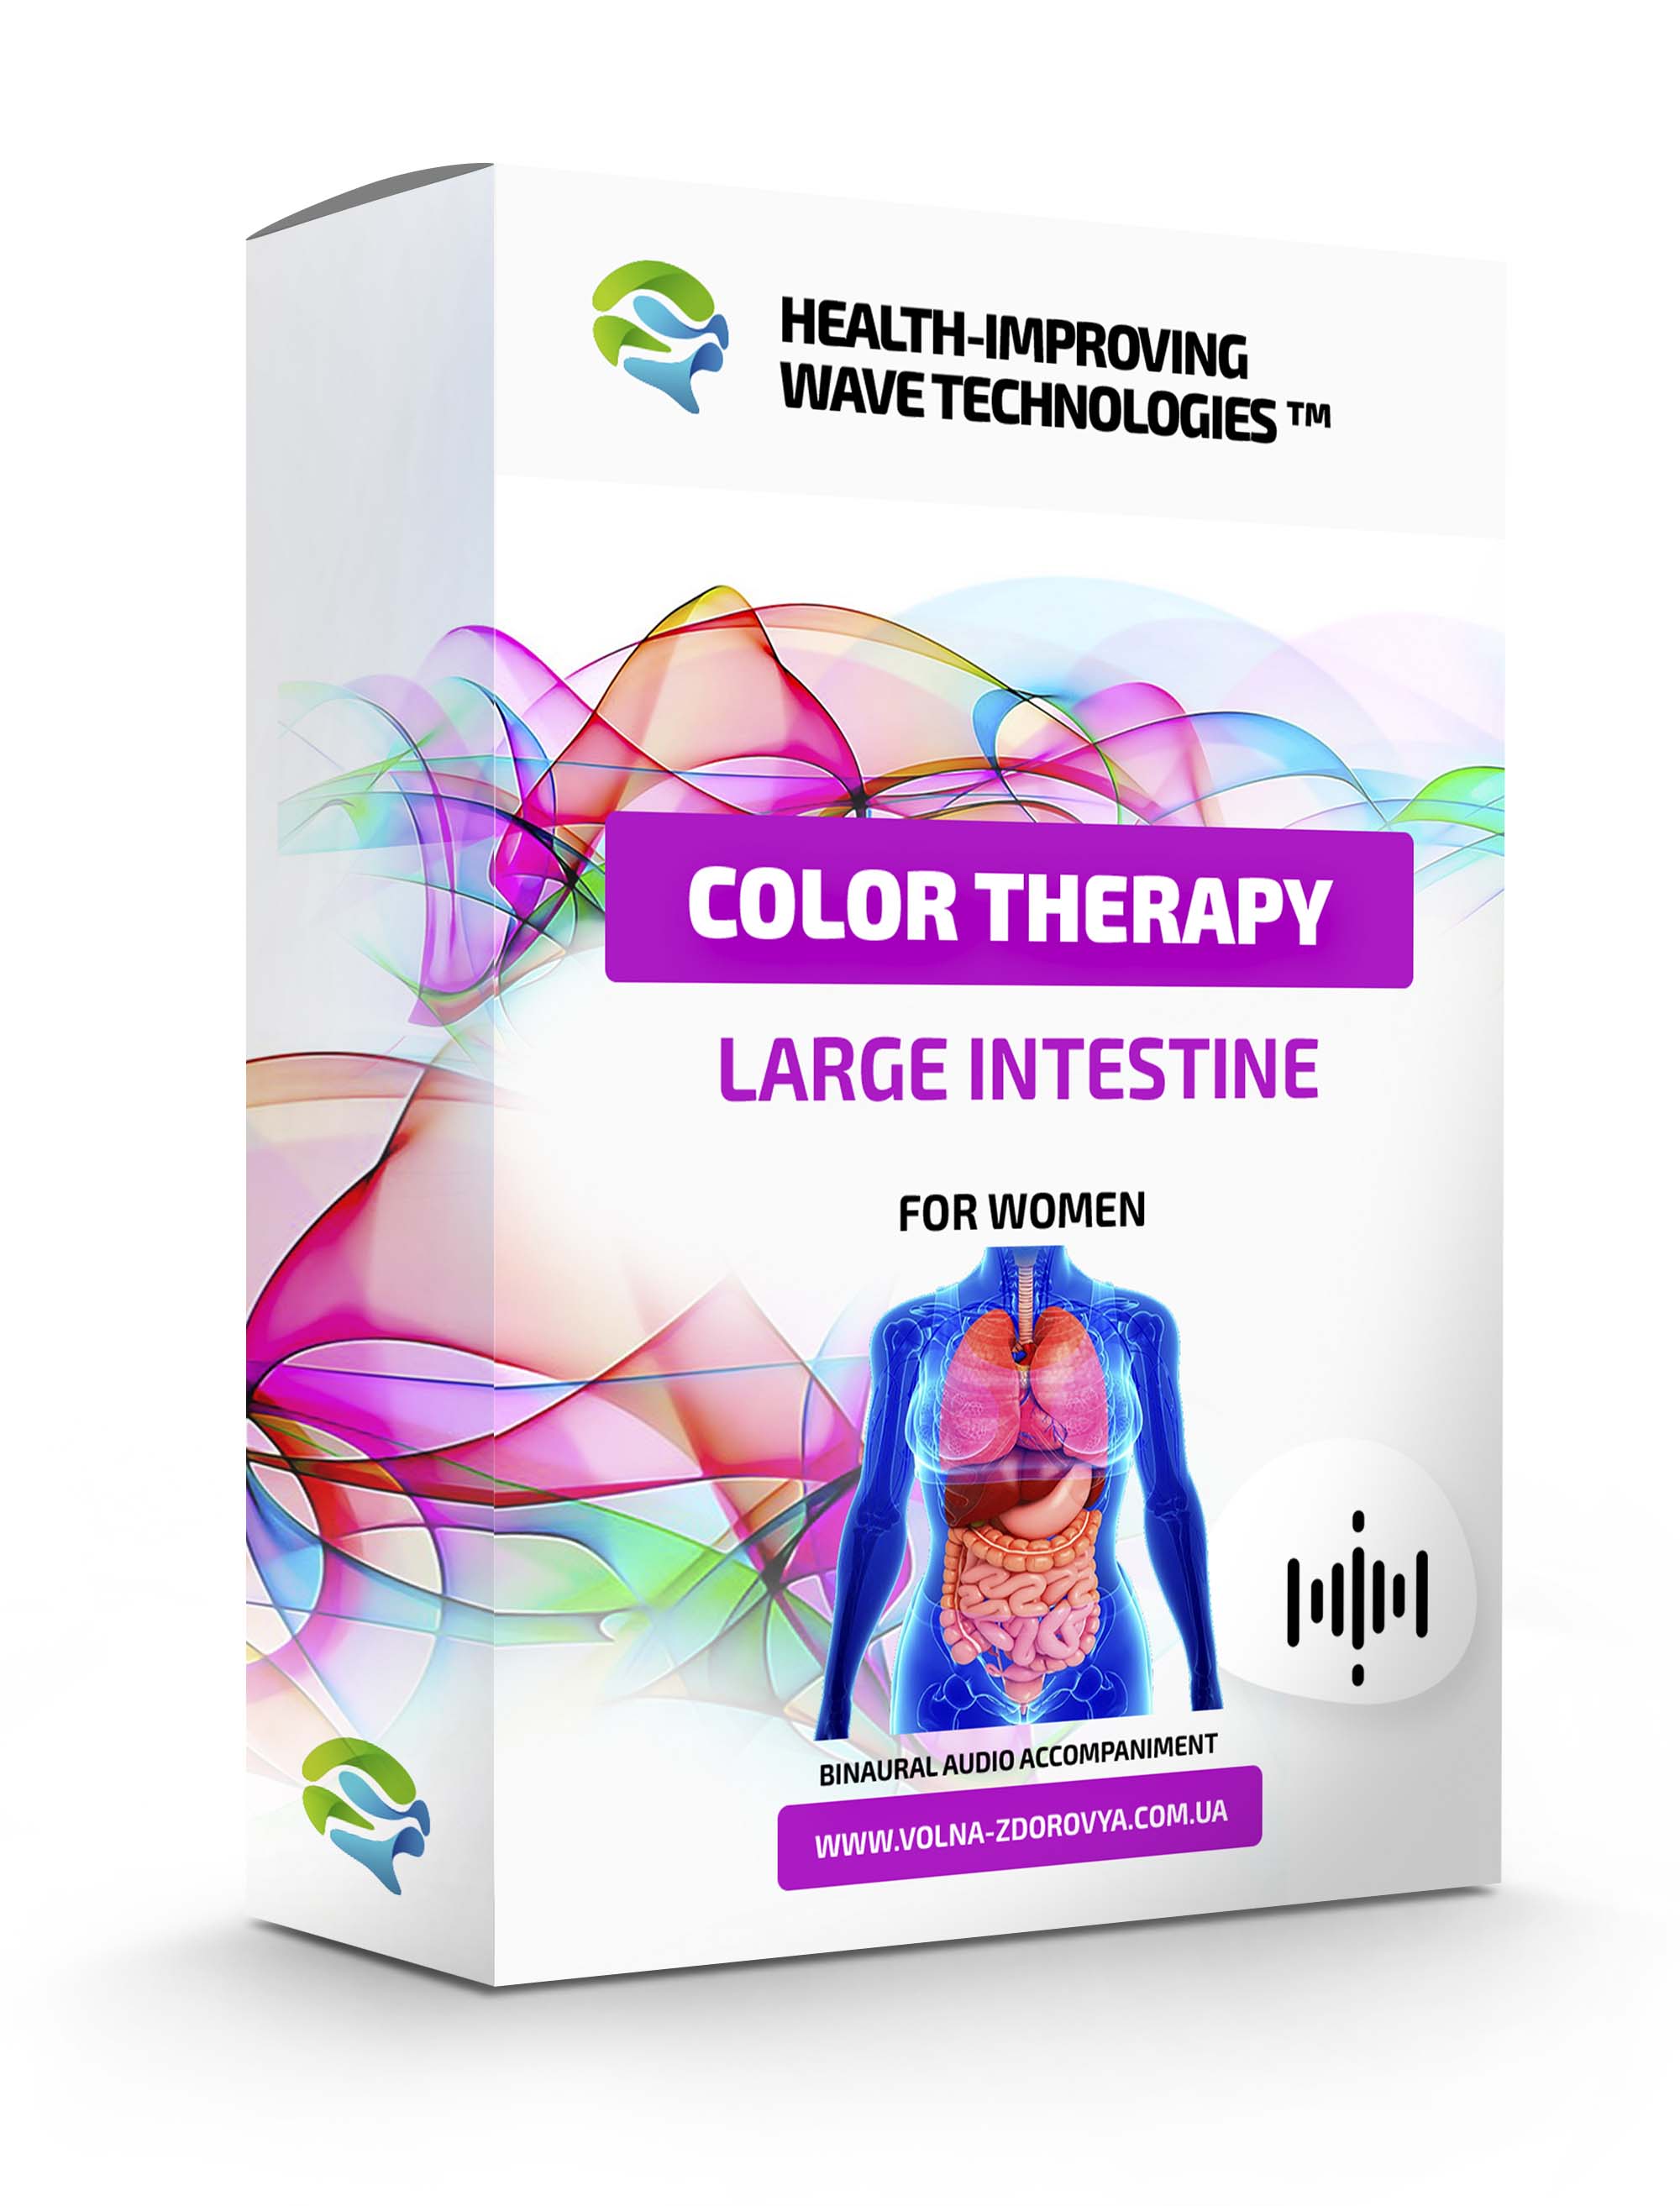 Сolor therapy - Large Intestine. For women